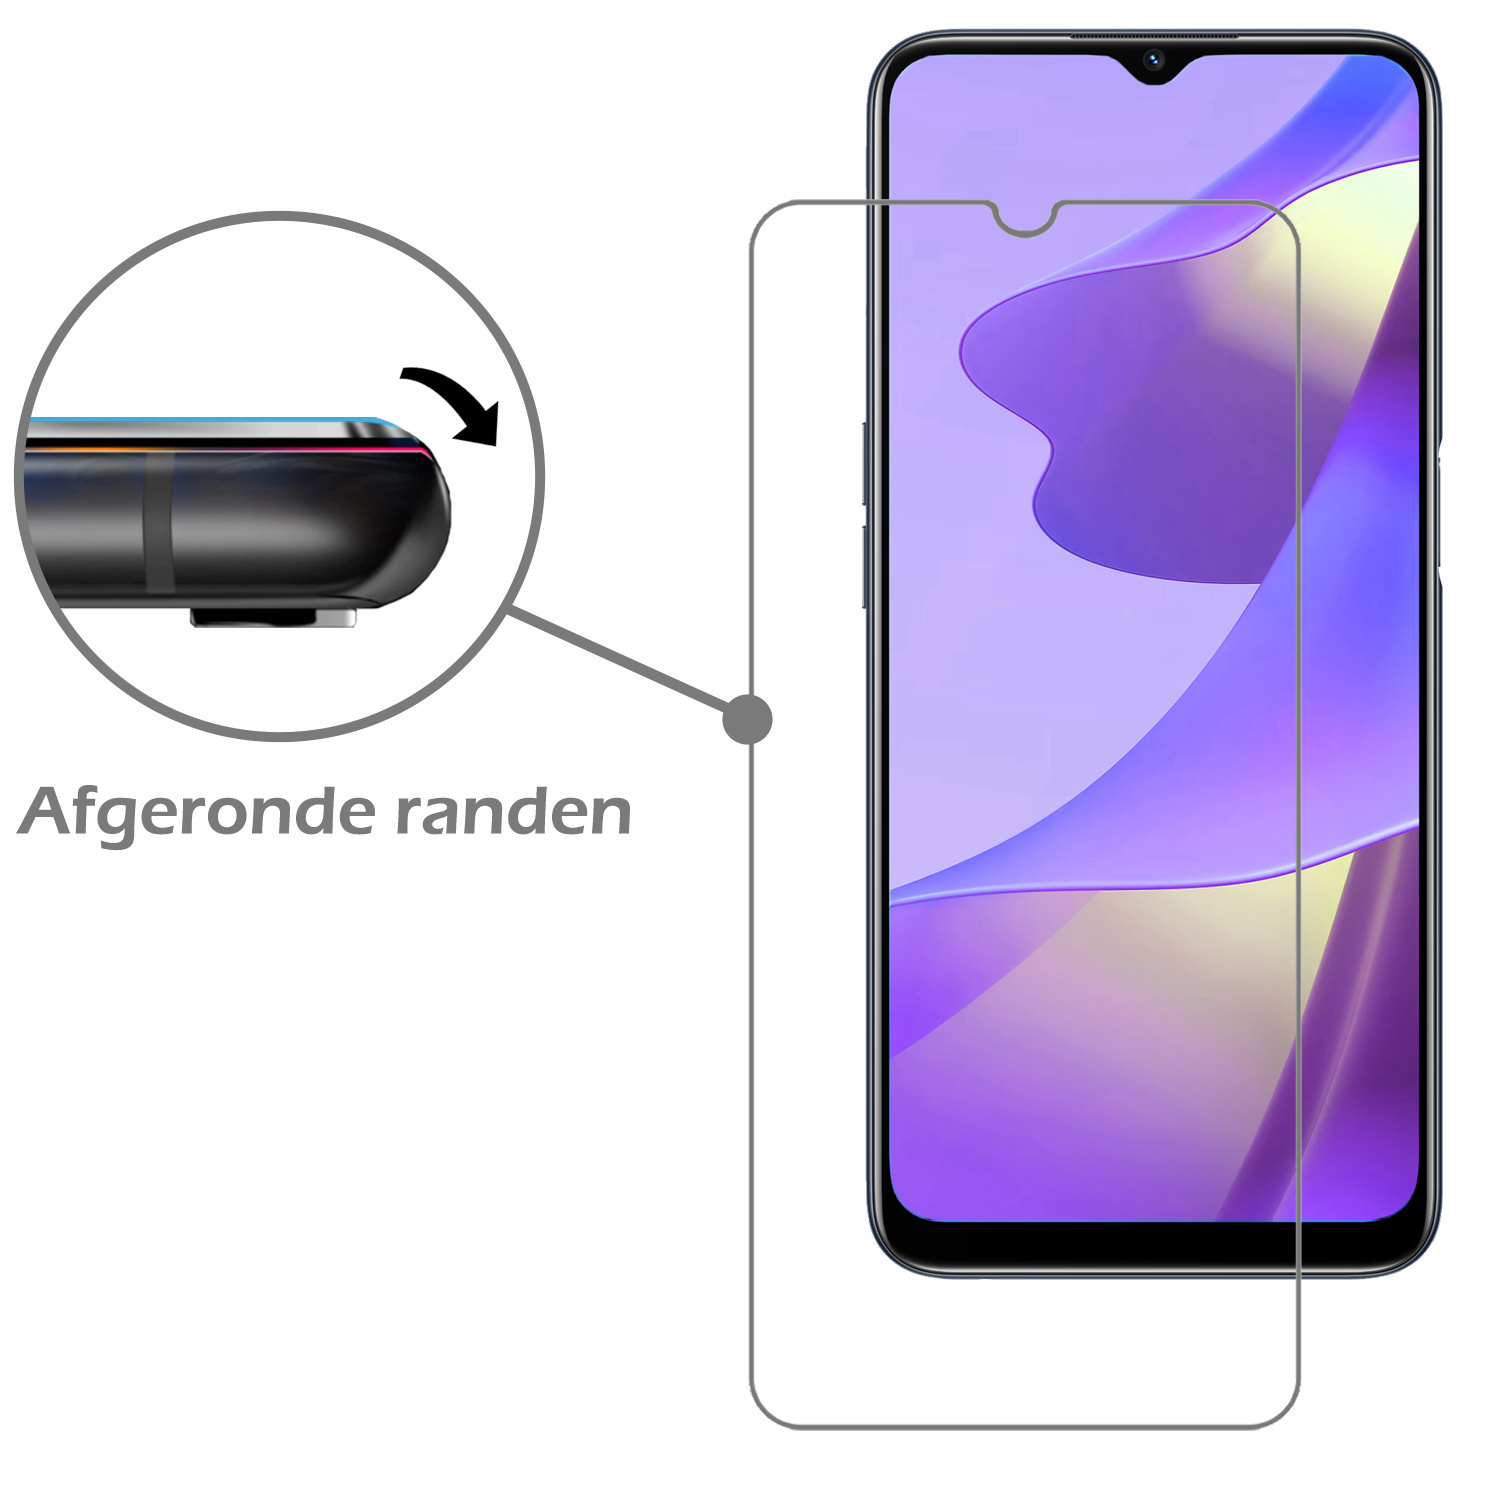 Nomfy OPPO A16s Hoesje Bookcase Met 2x Screenprotector - OPPO A16s Screenprotector 2x - OPPO A16s Book Case Met 2x Screenprotector Rose Goud